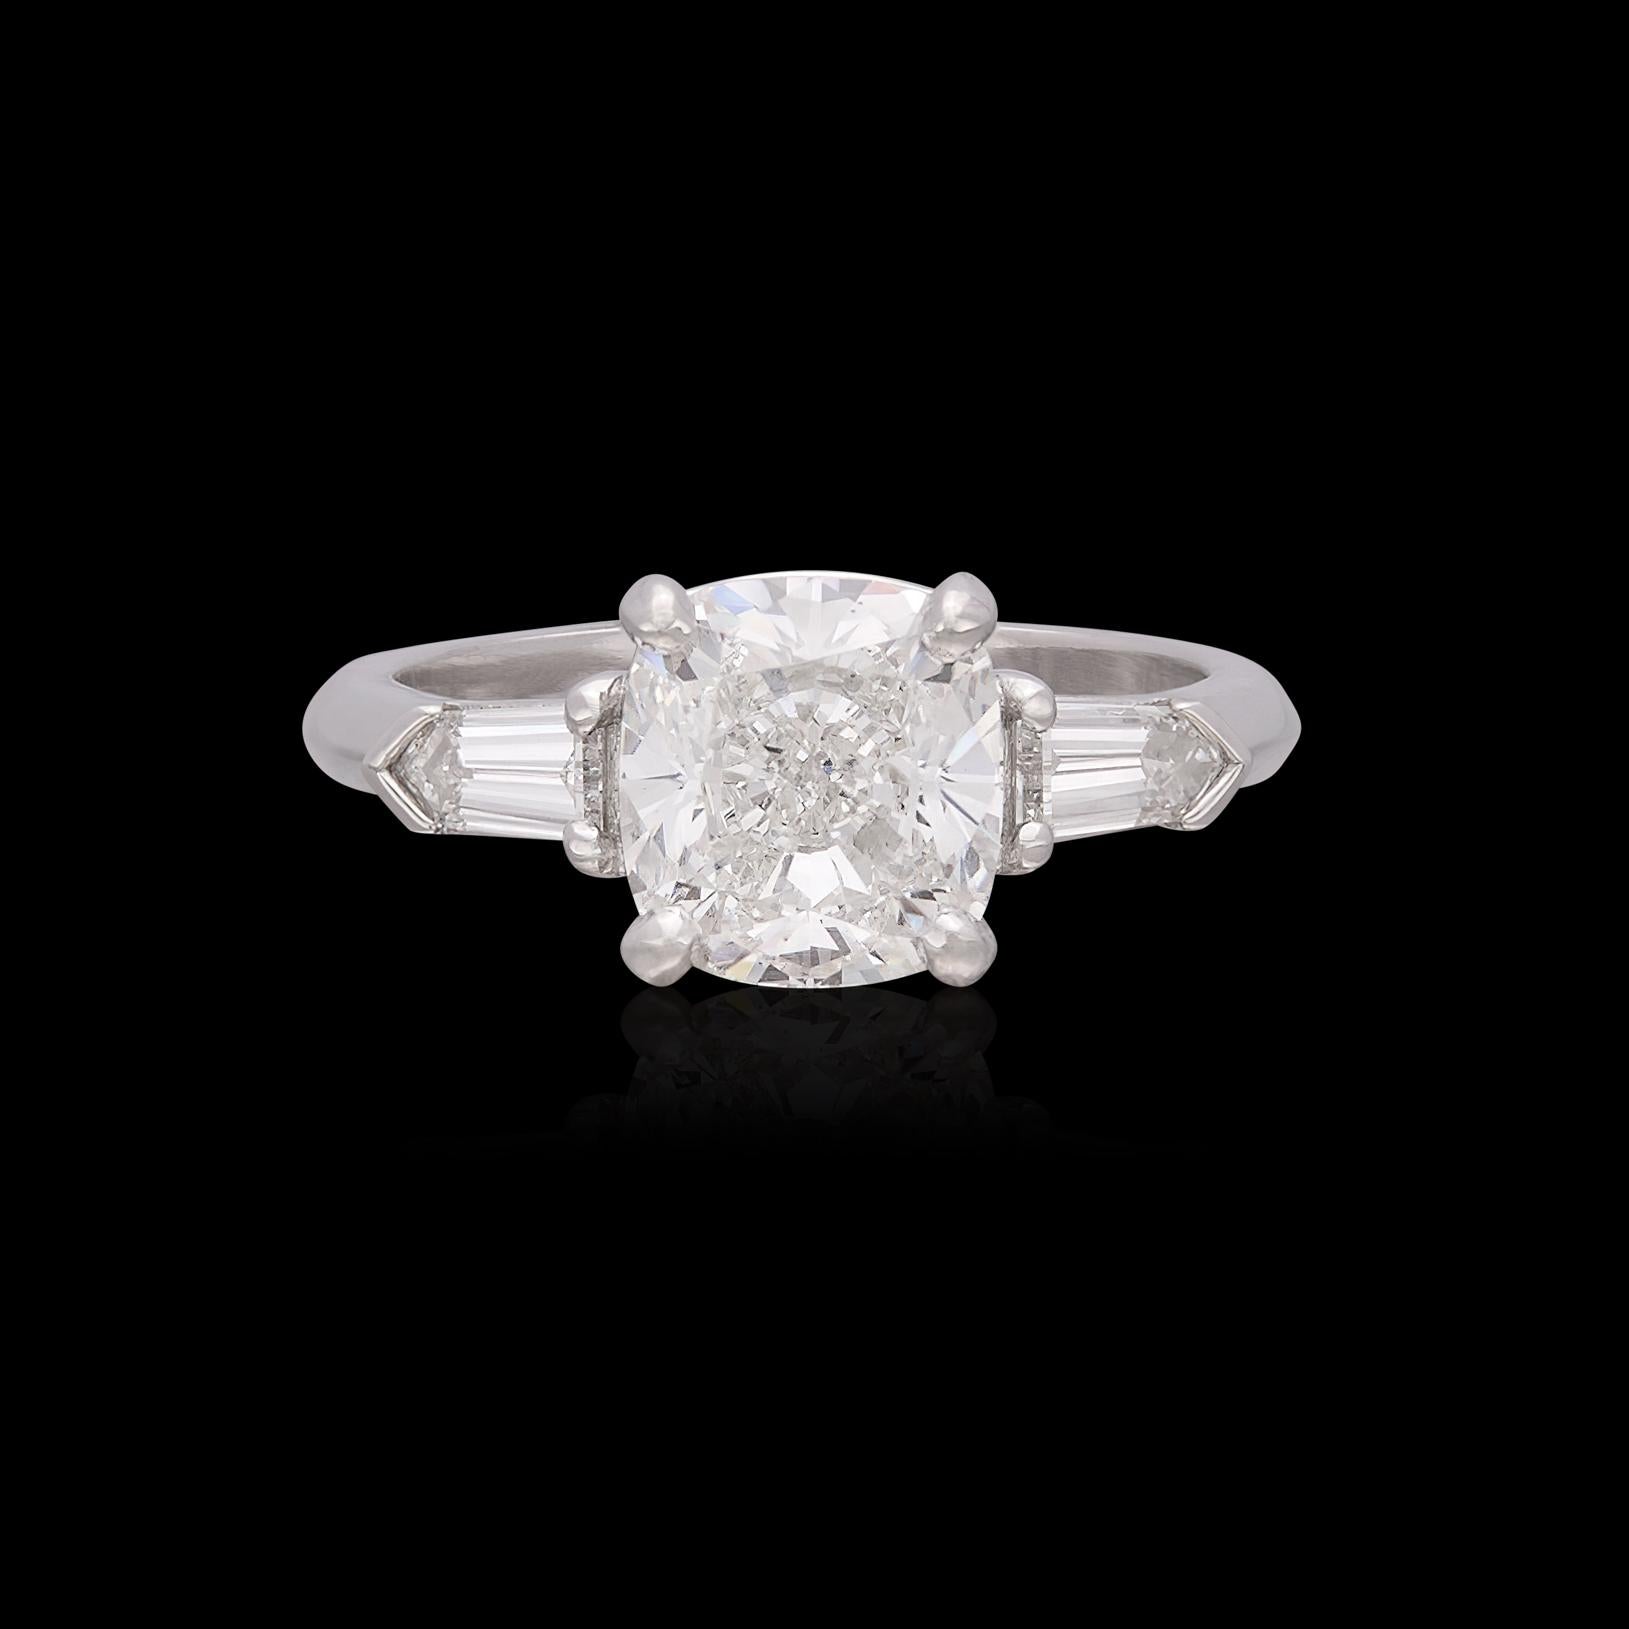 An extraordinary engagement ring meant for an extraordinary bride. This platinum beauty features a 2.62 carat Cushion Cut diamond flanked by a Bullet Cut diamond expertly set on either side for 0.46 carats. The gorgeous cushion cut diamond has been